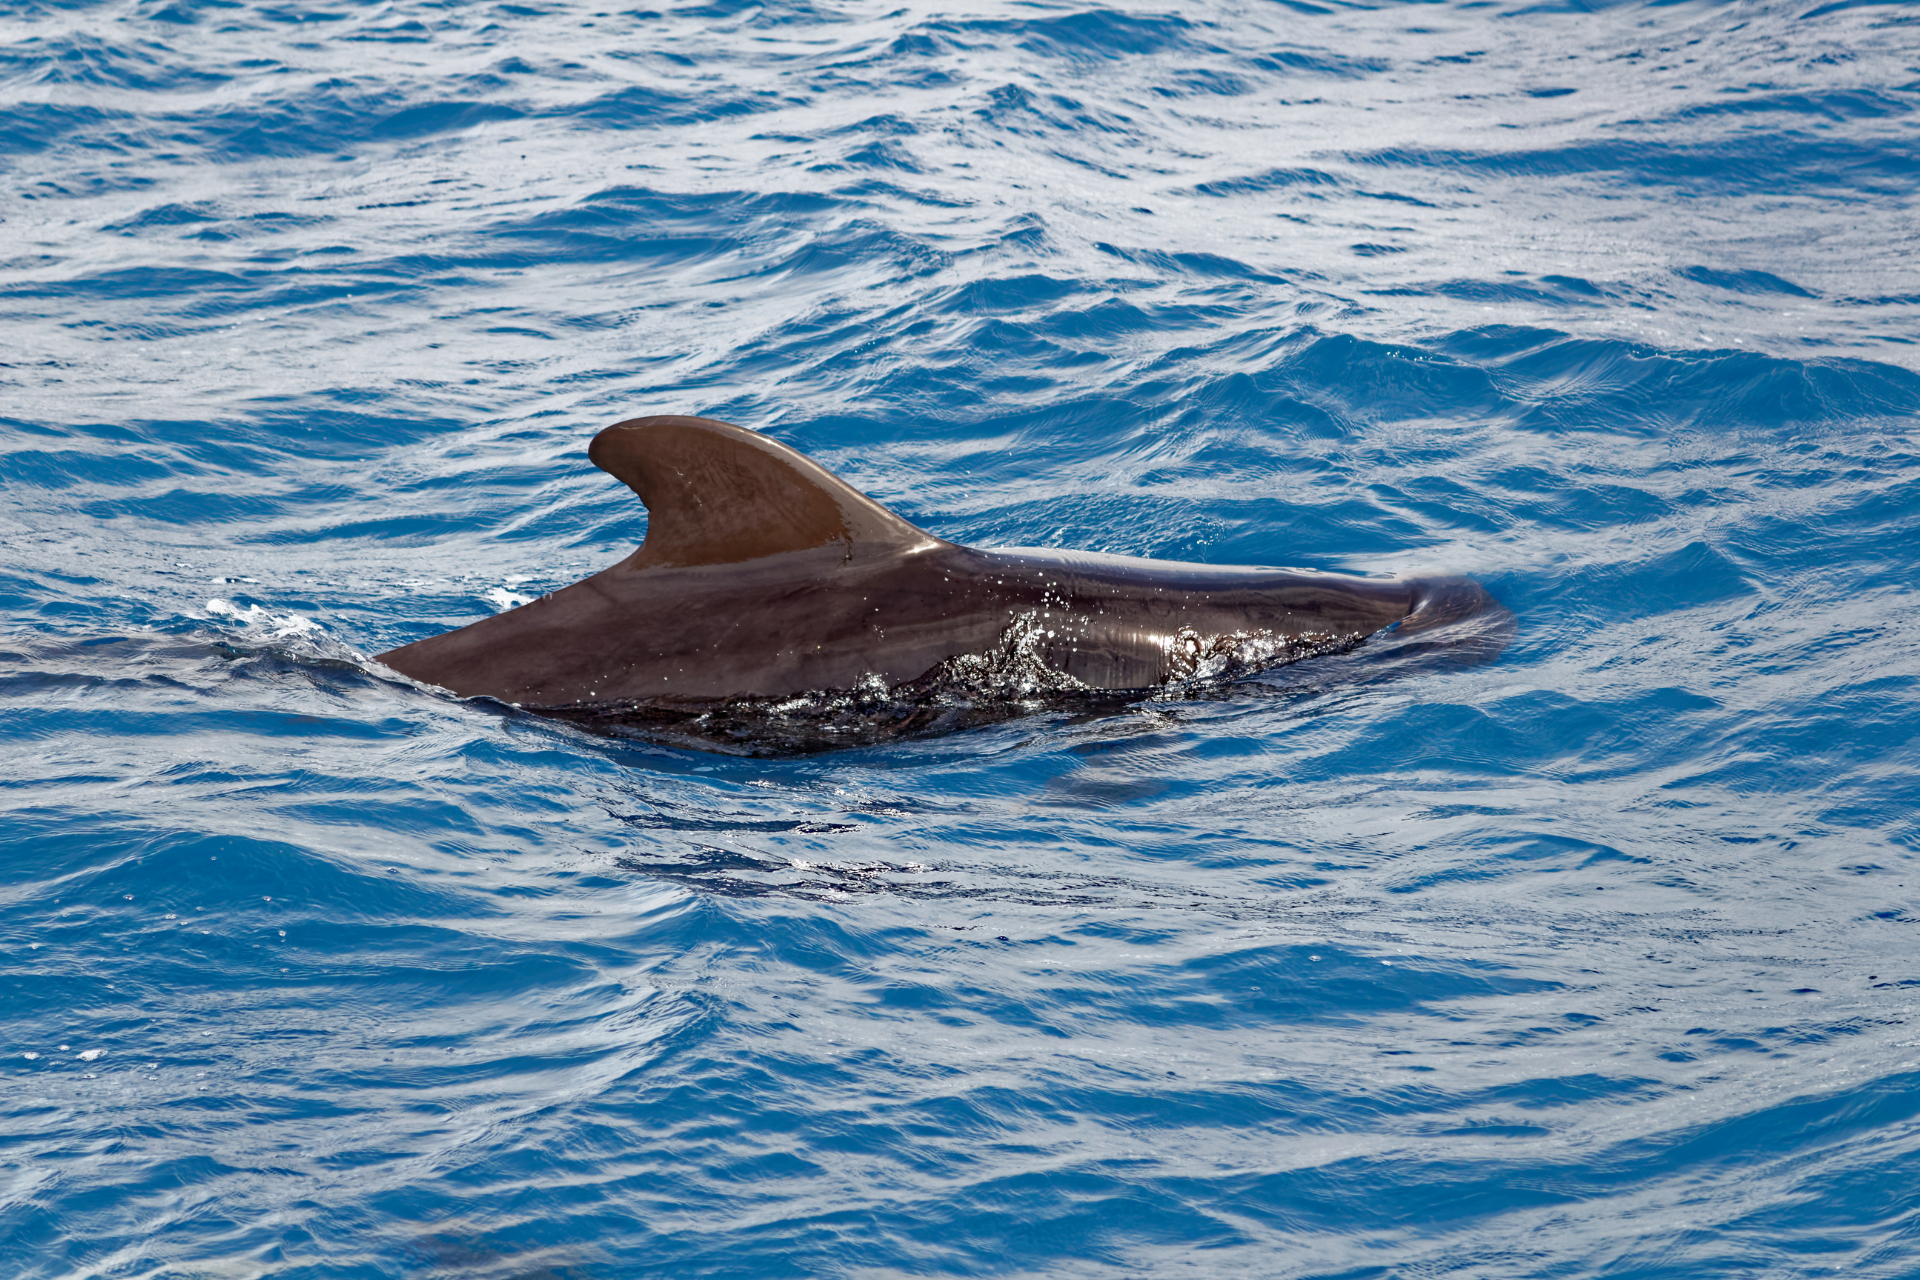 A short finned pilot whale spotted in a whale watching tour in Sri Lanka